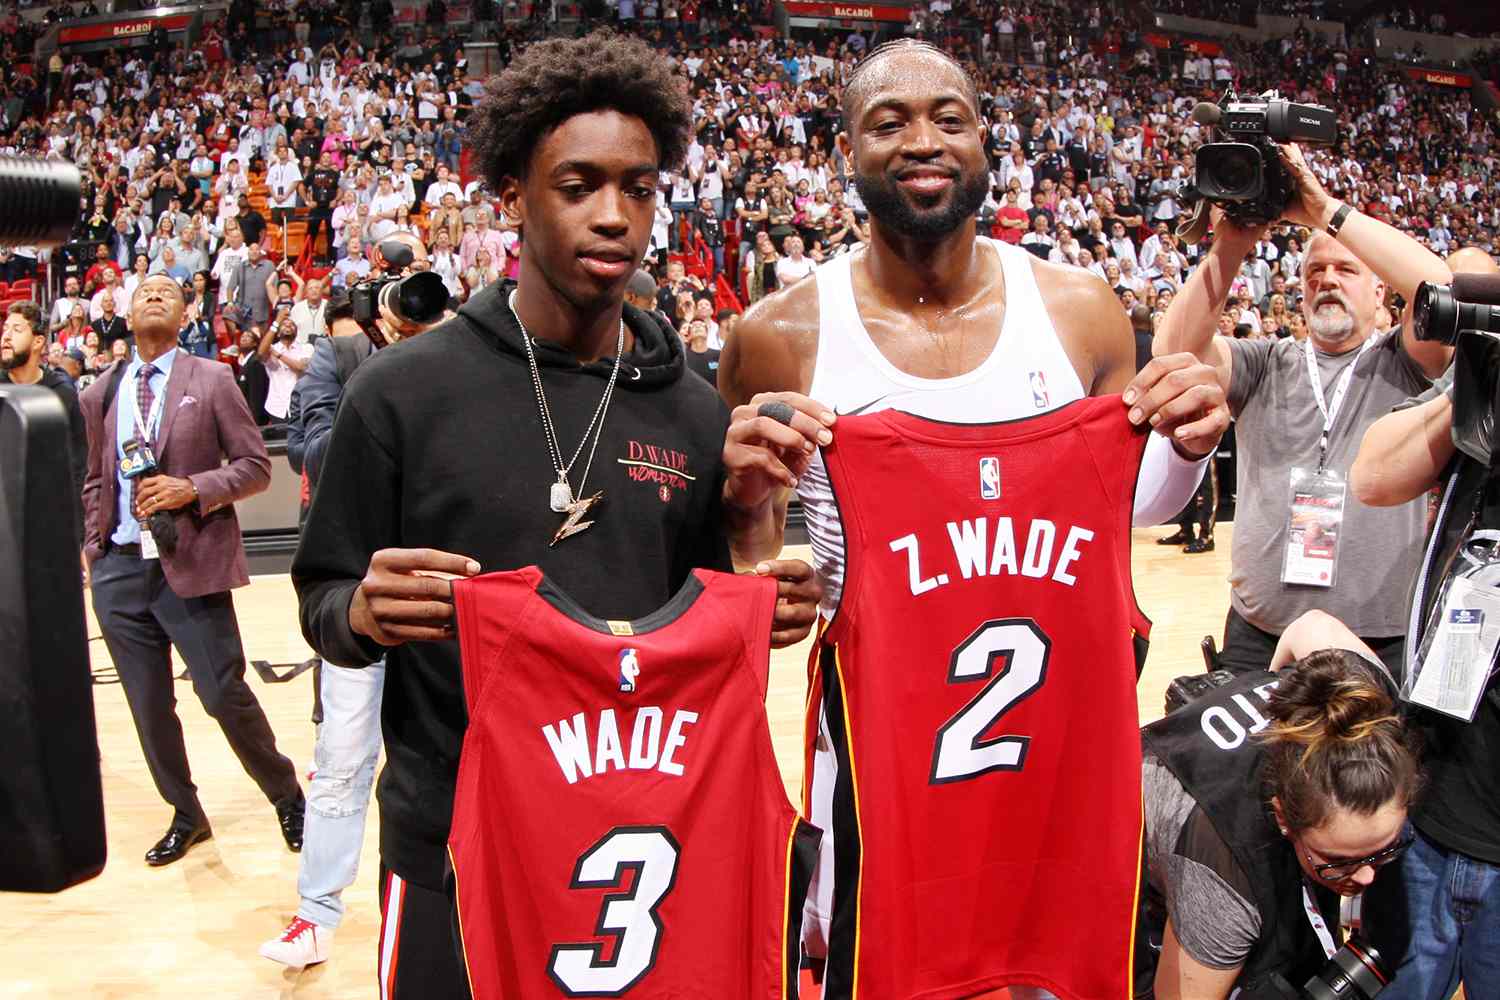 Dwyane Wade #3 of the Miami Heat and son Zaire pose for a photo following the game against the Philadelphia 76ers on April 9, 2019 at American Airlines Arena in Miami, Florida